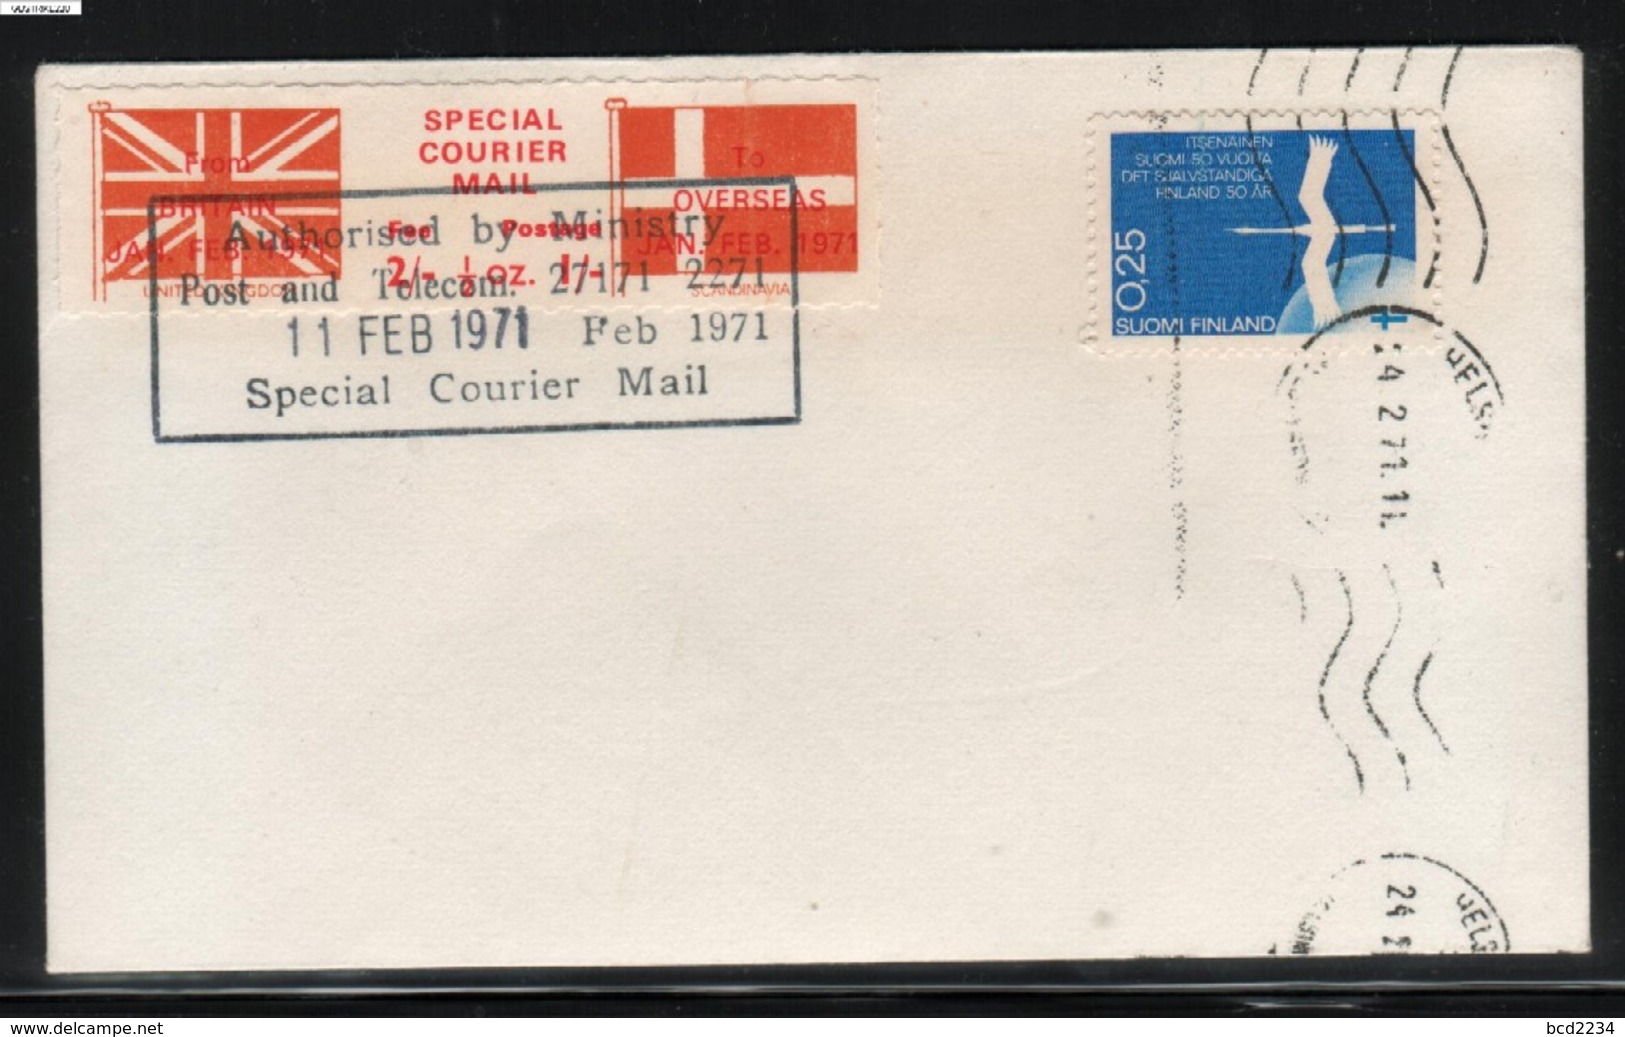 GREAT BRITAIN GB 1971 POSTAL STRIKE MAIL SPECIAL COURIER MAIL 1ST ISSUE PRE-DECIMAL COVER HELSINKI FINLAND 11 FEBRUARY - Plaatfouten En Curiosa